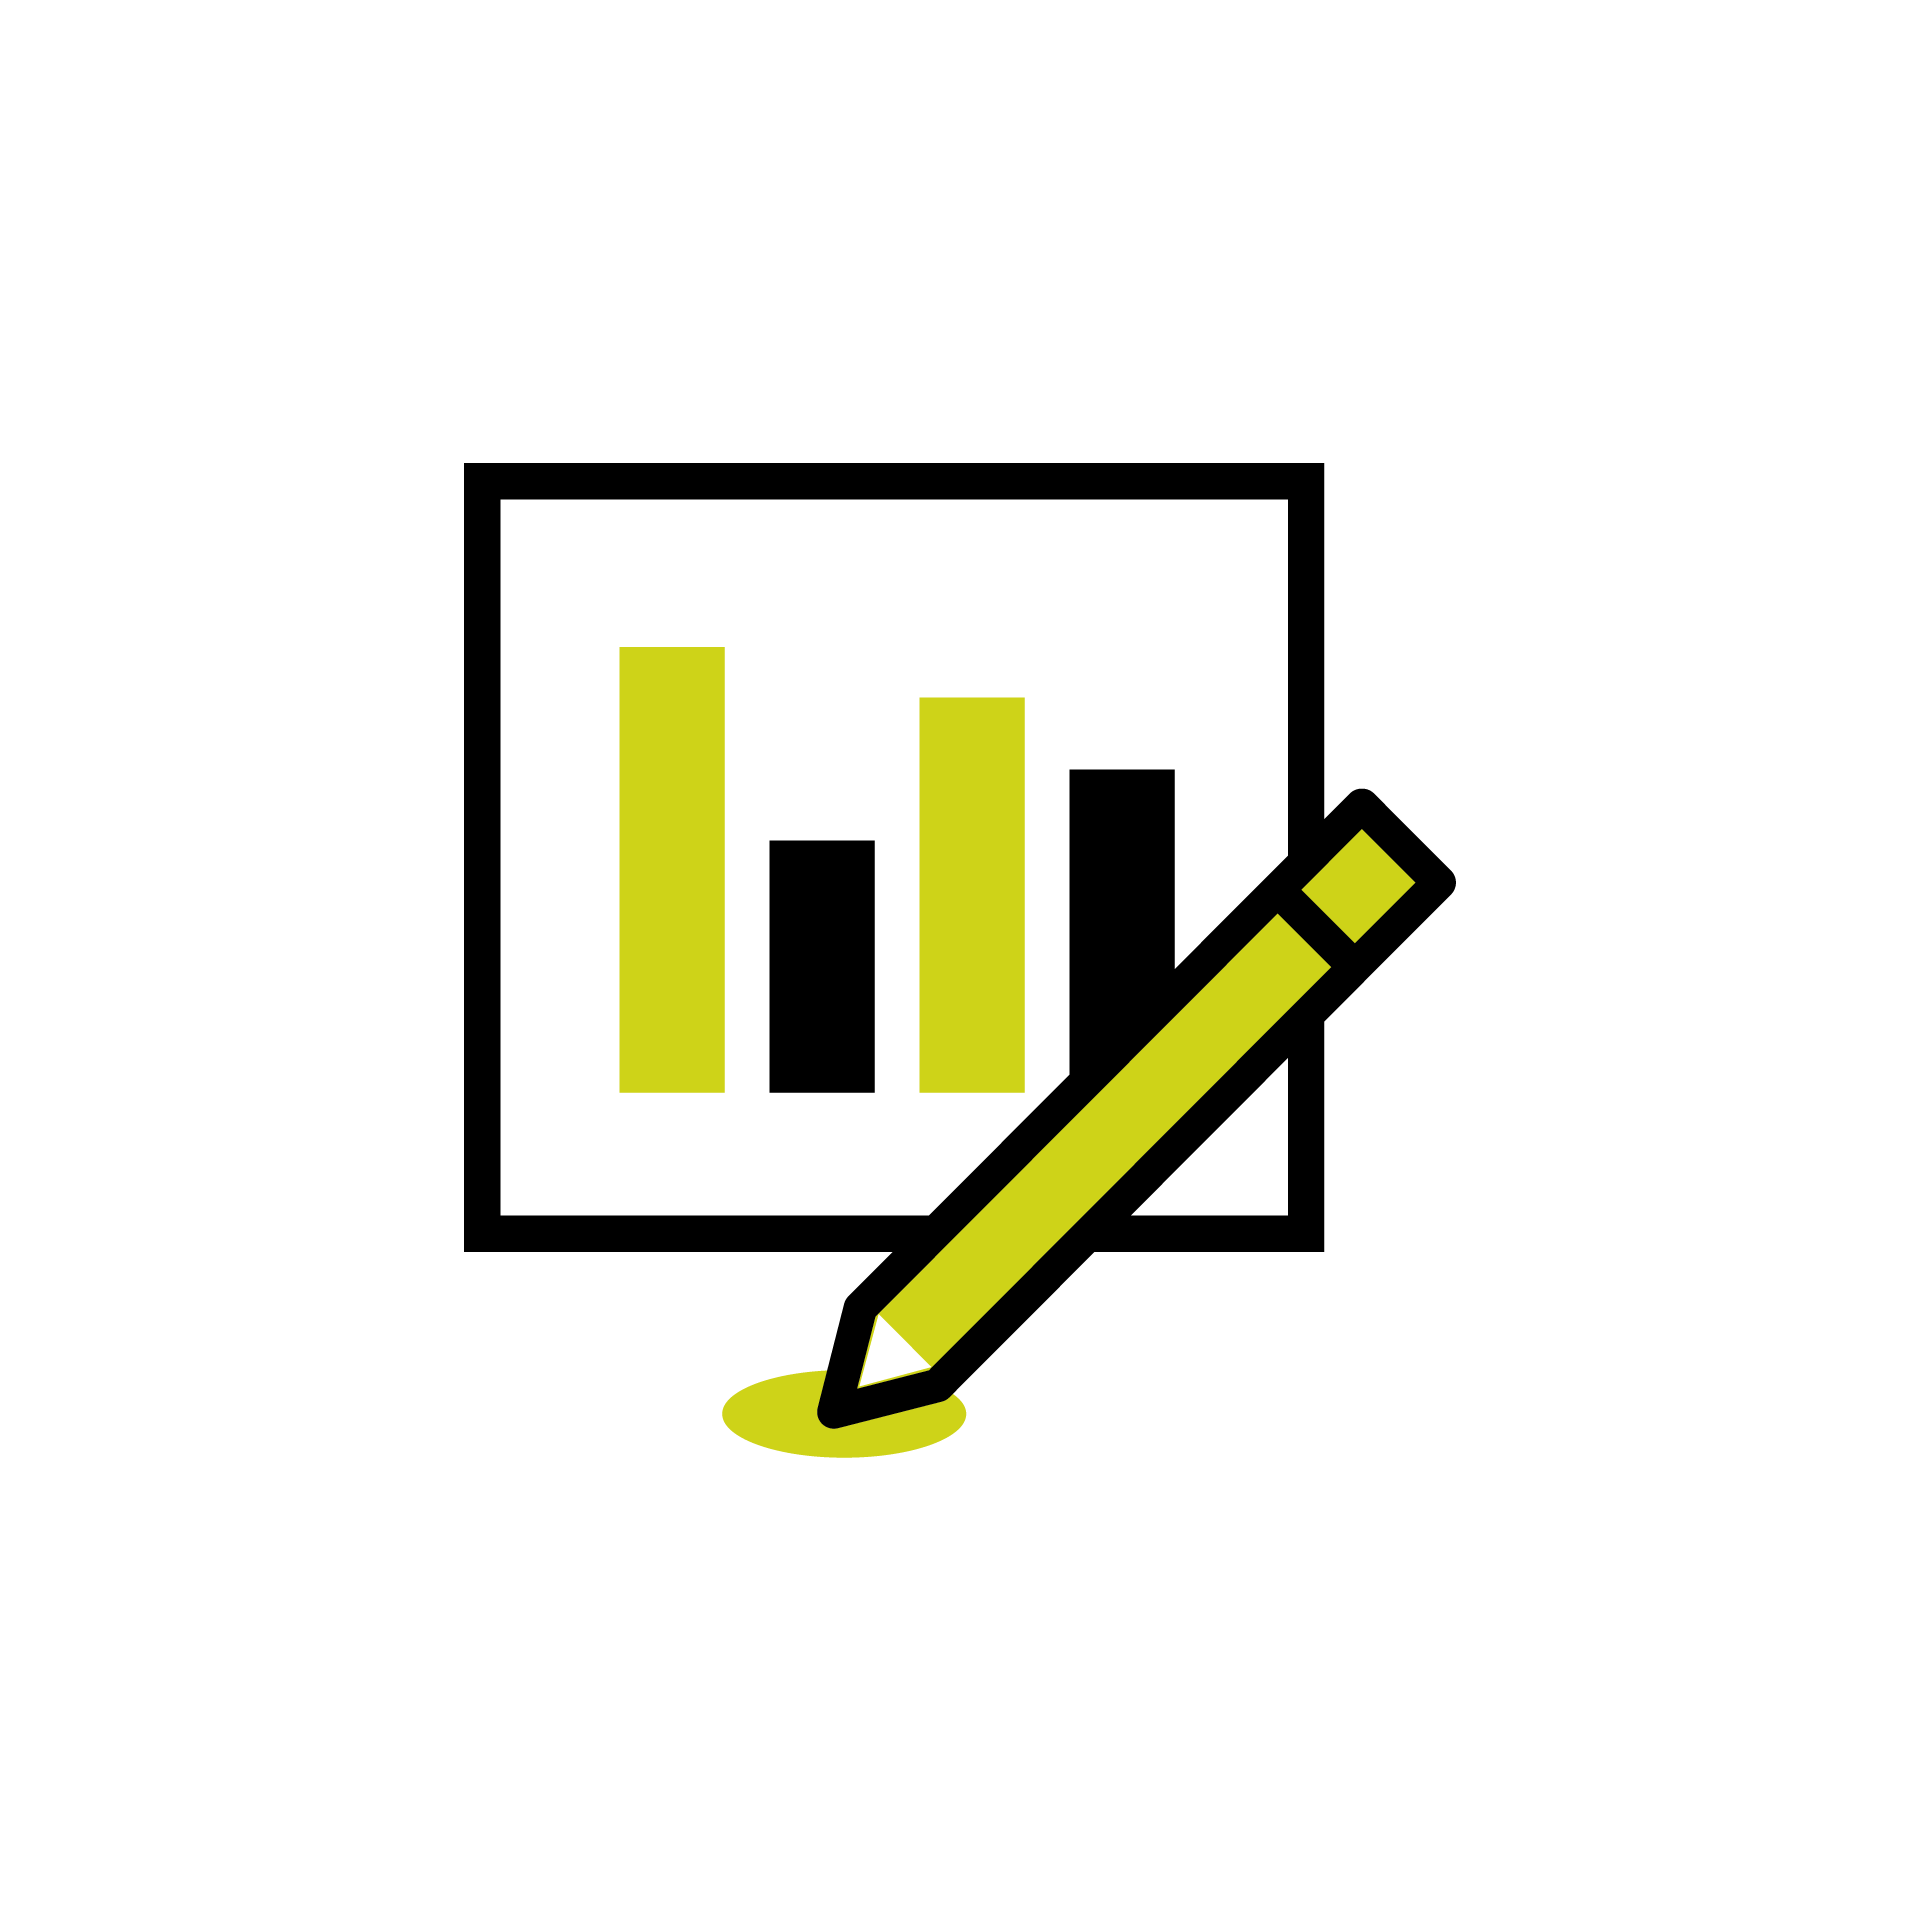 barchart with pencil icon